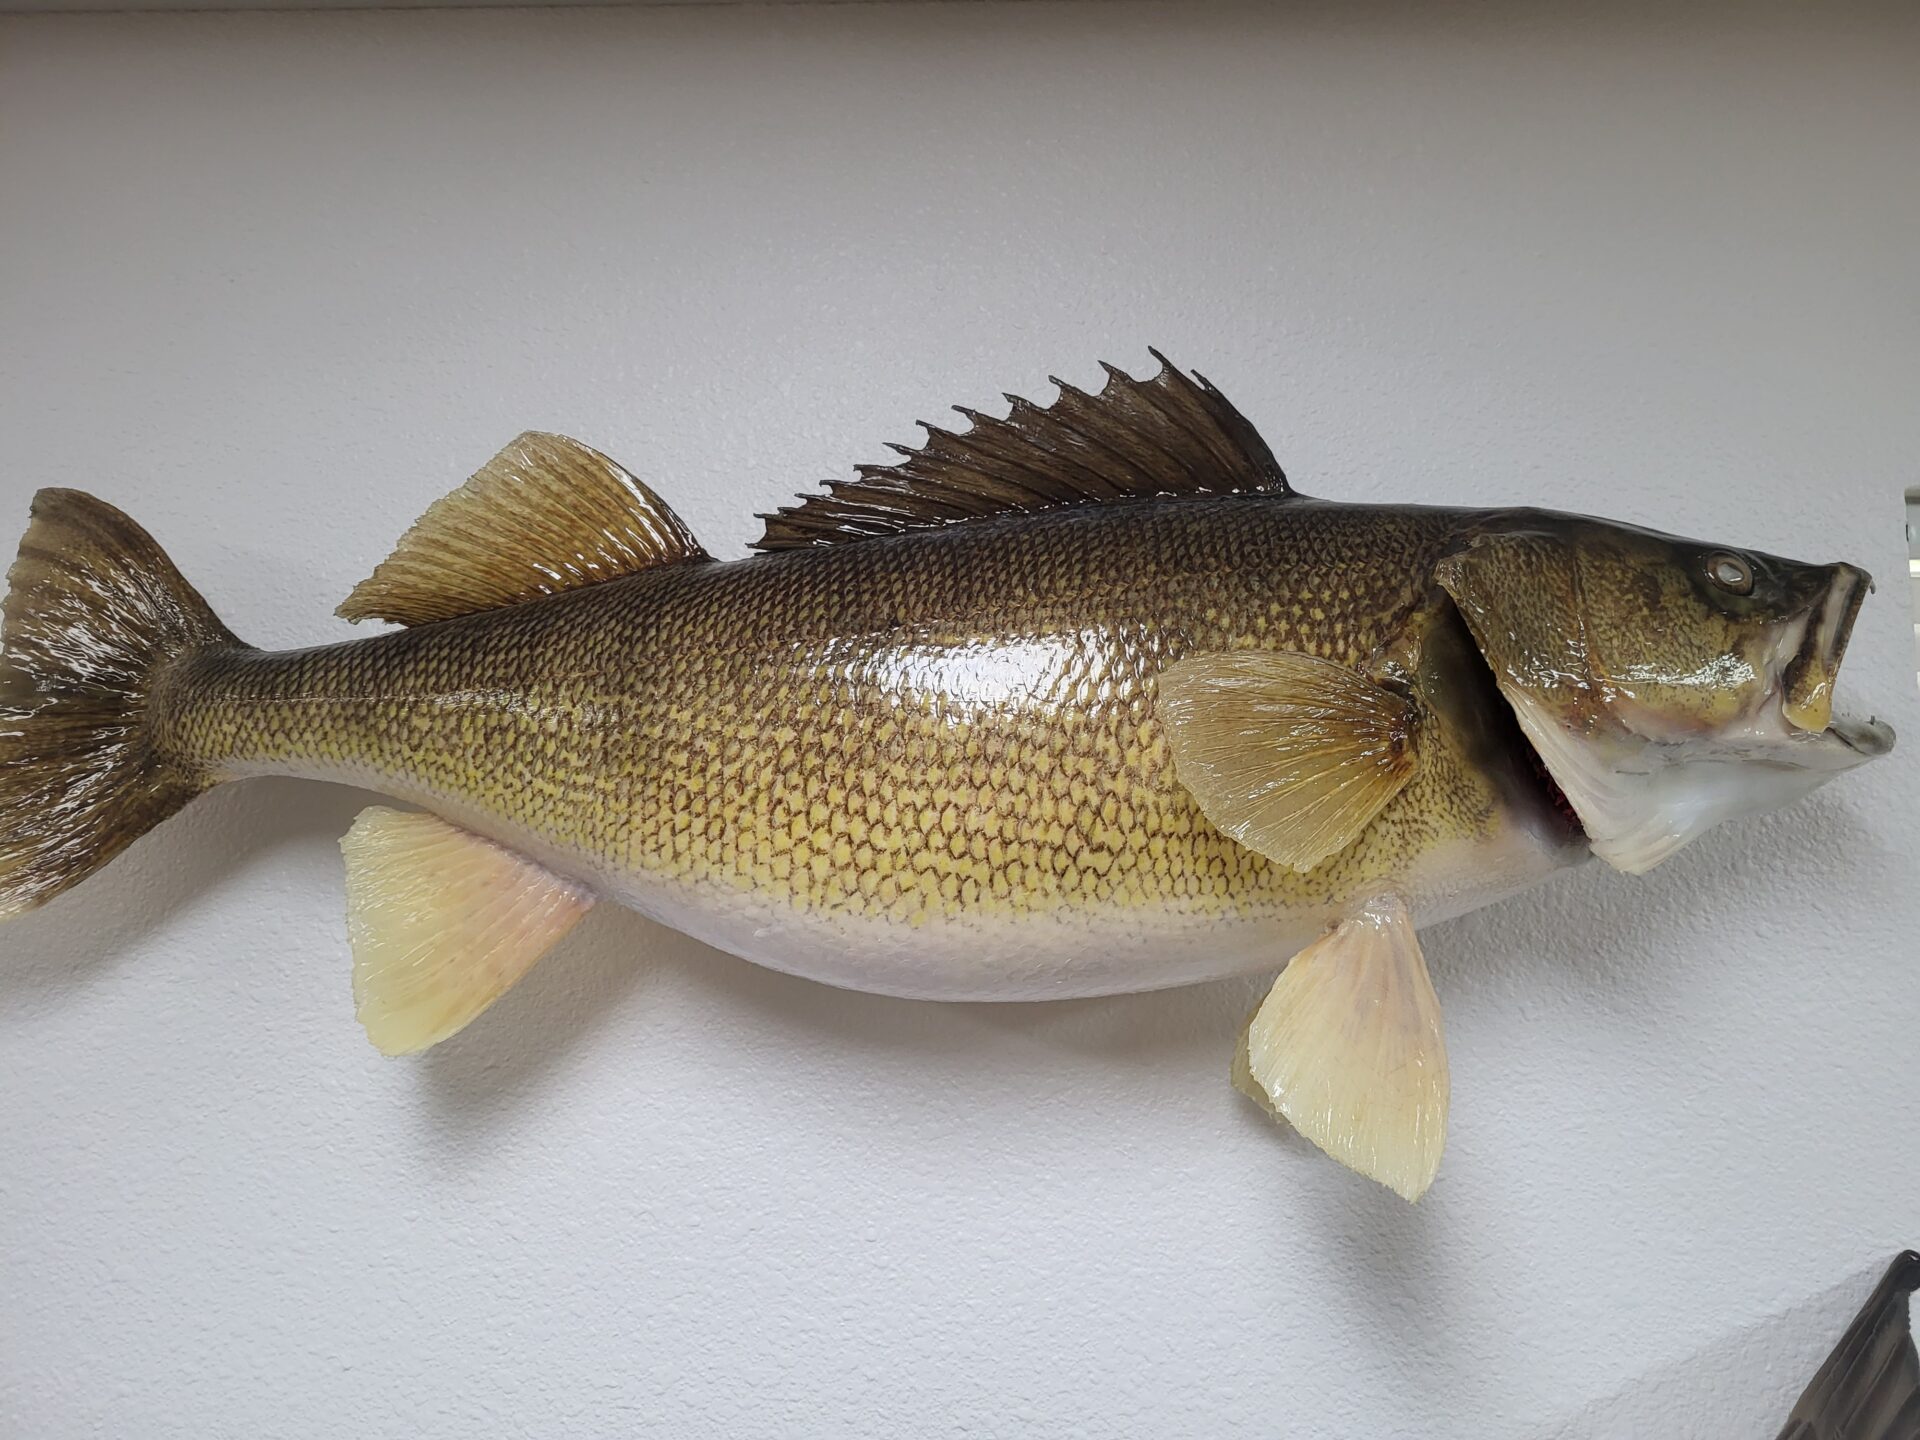 Detailed work goes into creating all fish taxidermy